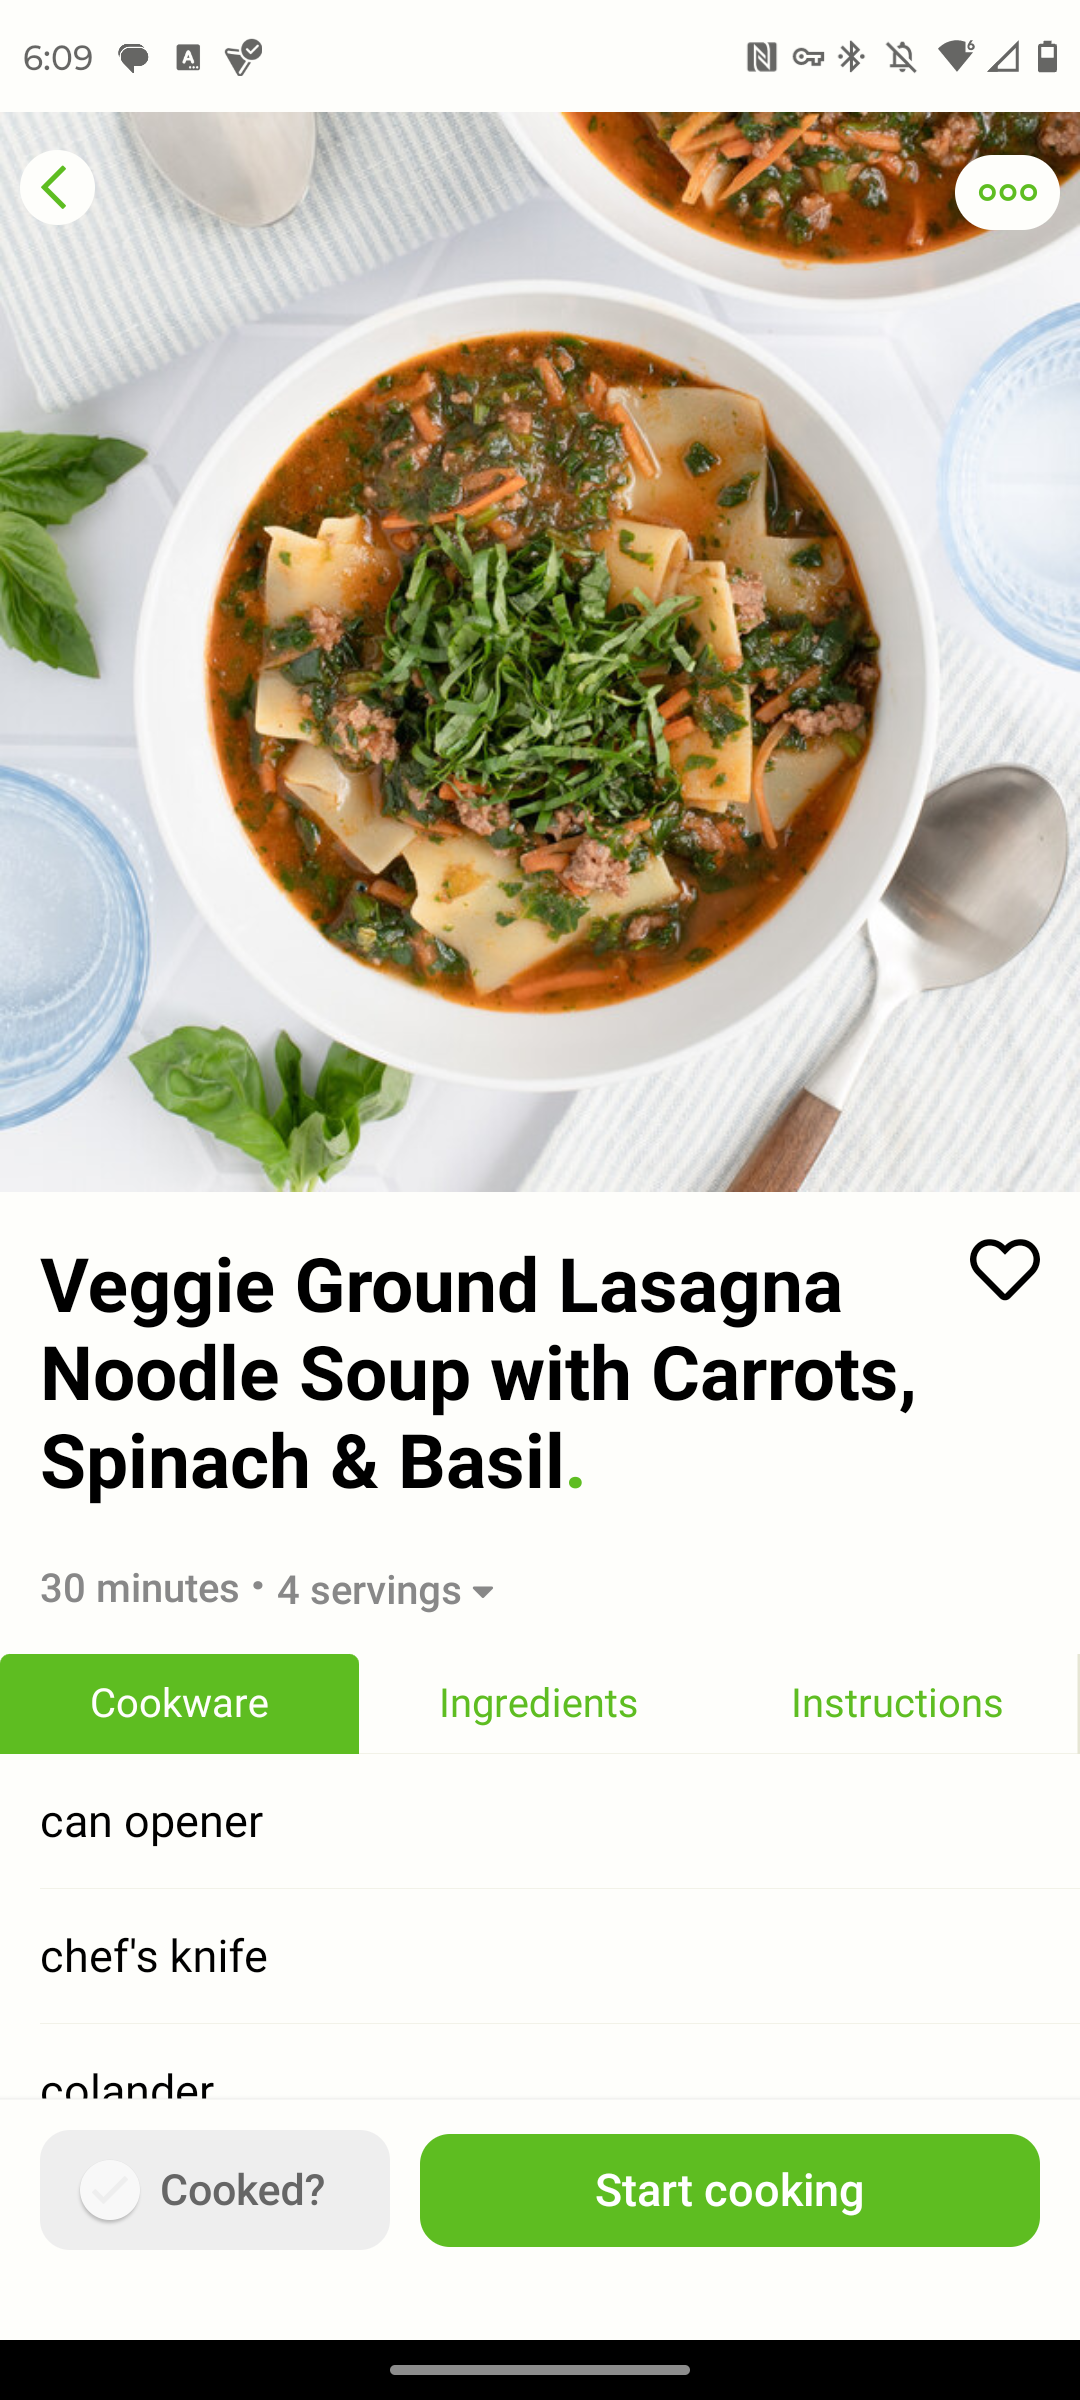 The Mealime app displaying a recipe